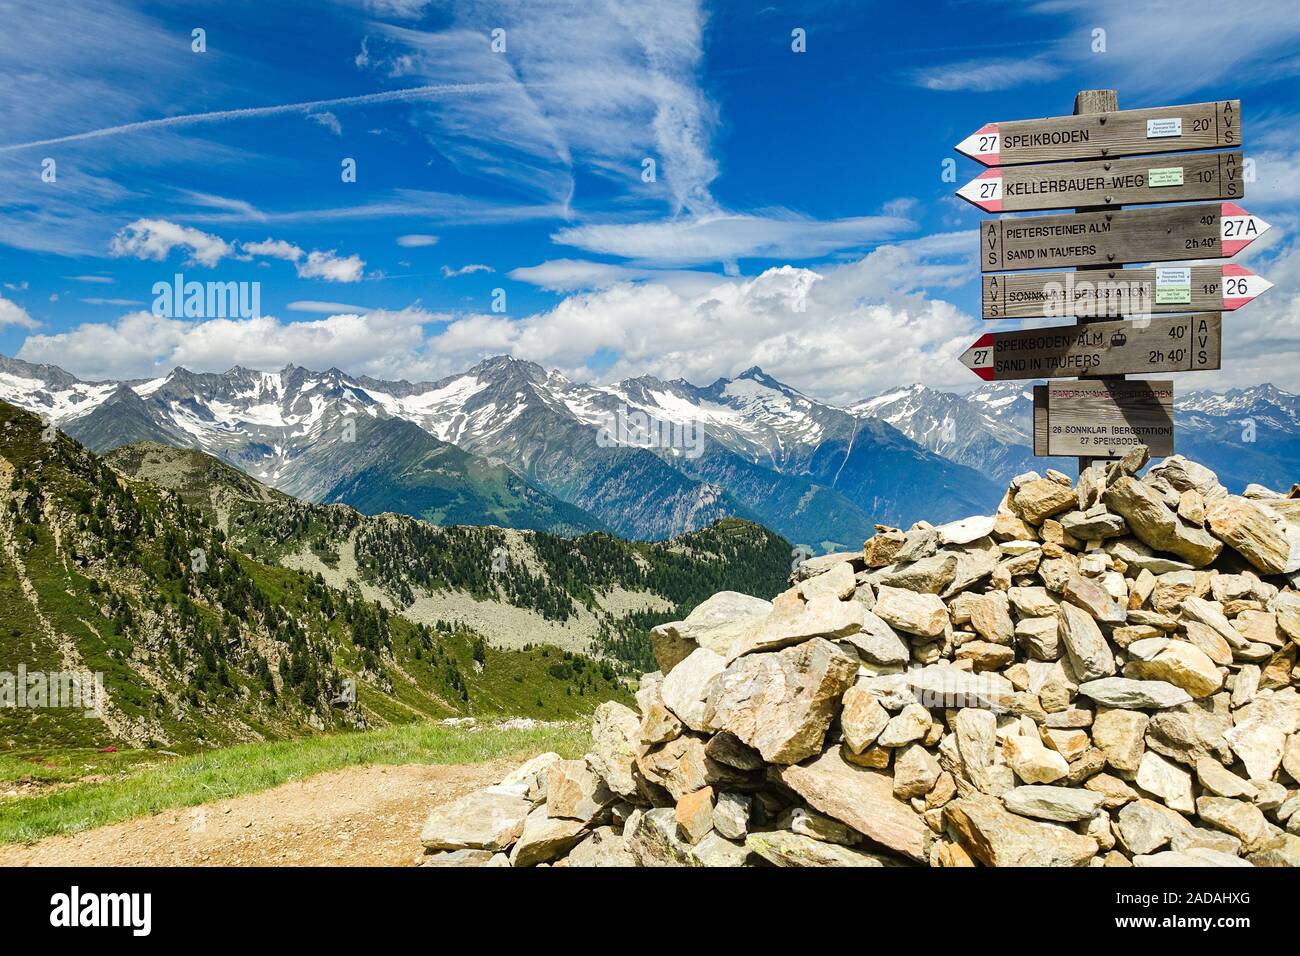 Information sign for hiking trails on the Speikboden, South Tyrol, Italy Stock Photo